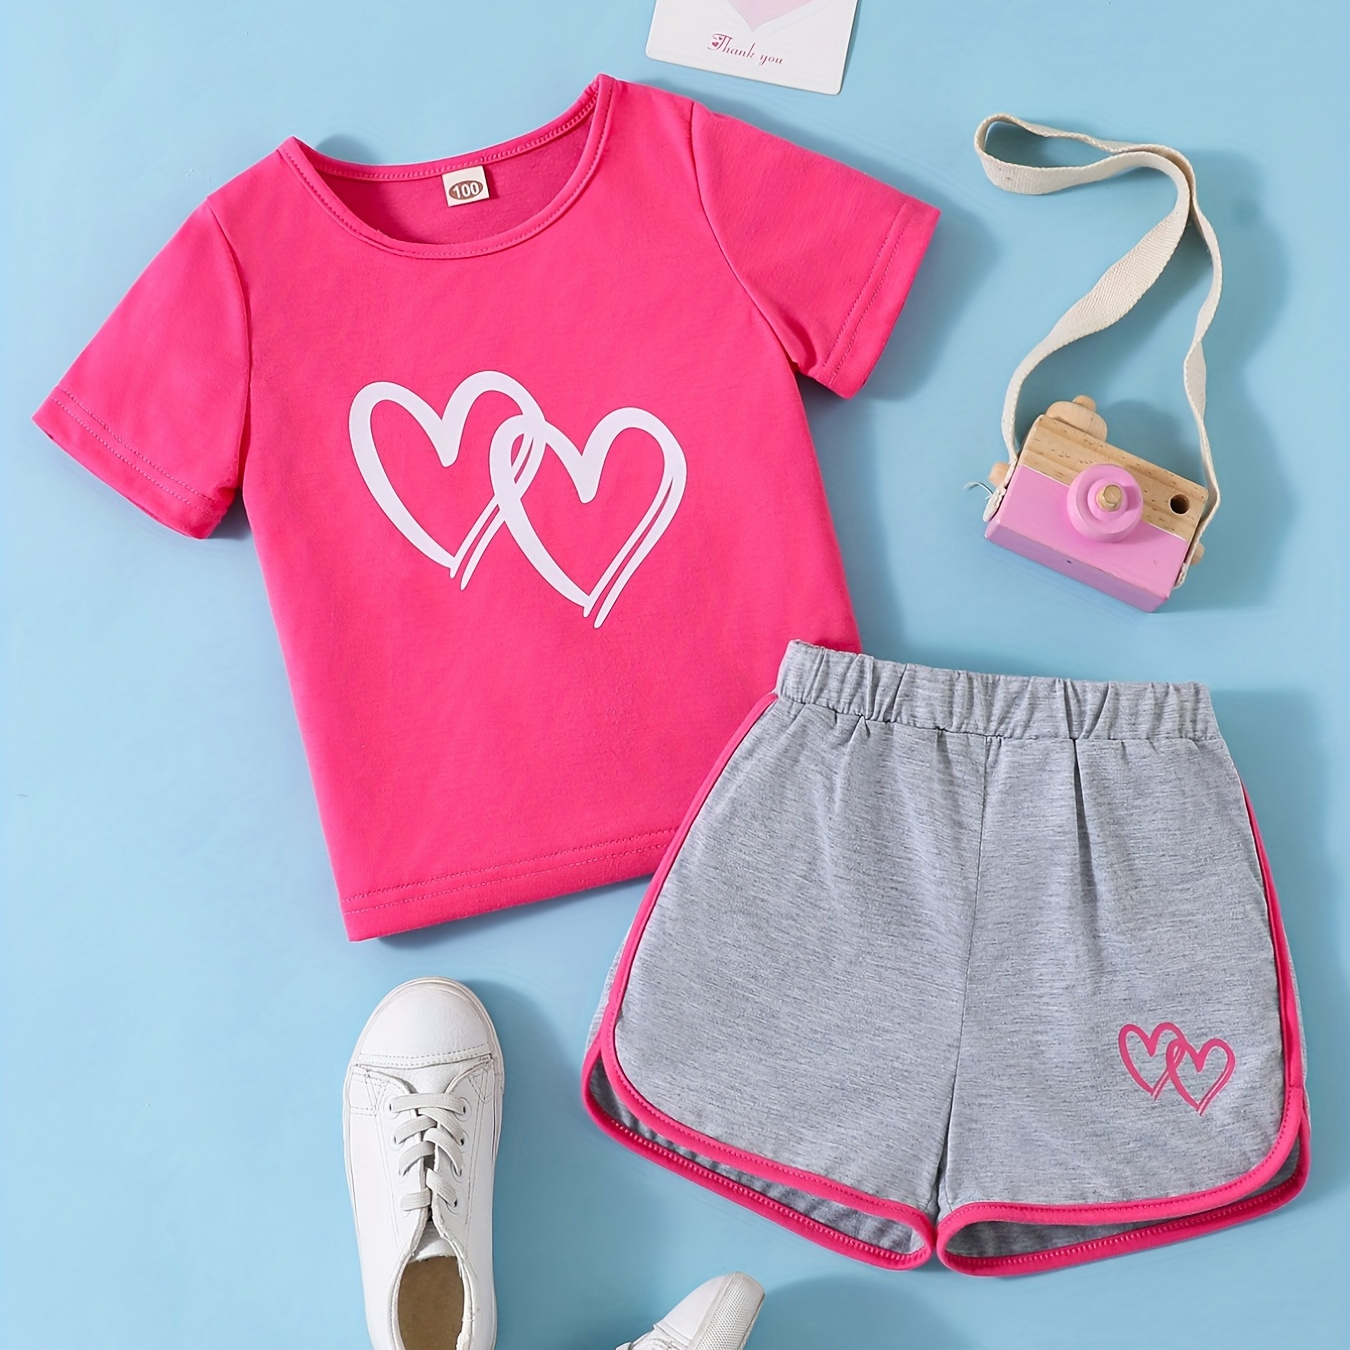 

2pcs Toddler Girls Heart Graphic T-shirts Casual Round Neck Tees Top & Contrast Binding Track Shorts Kids Summer Clothes